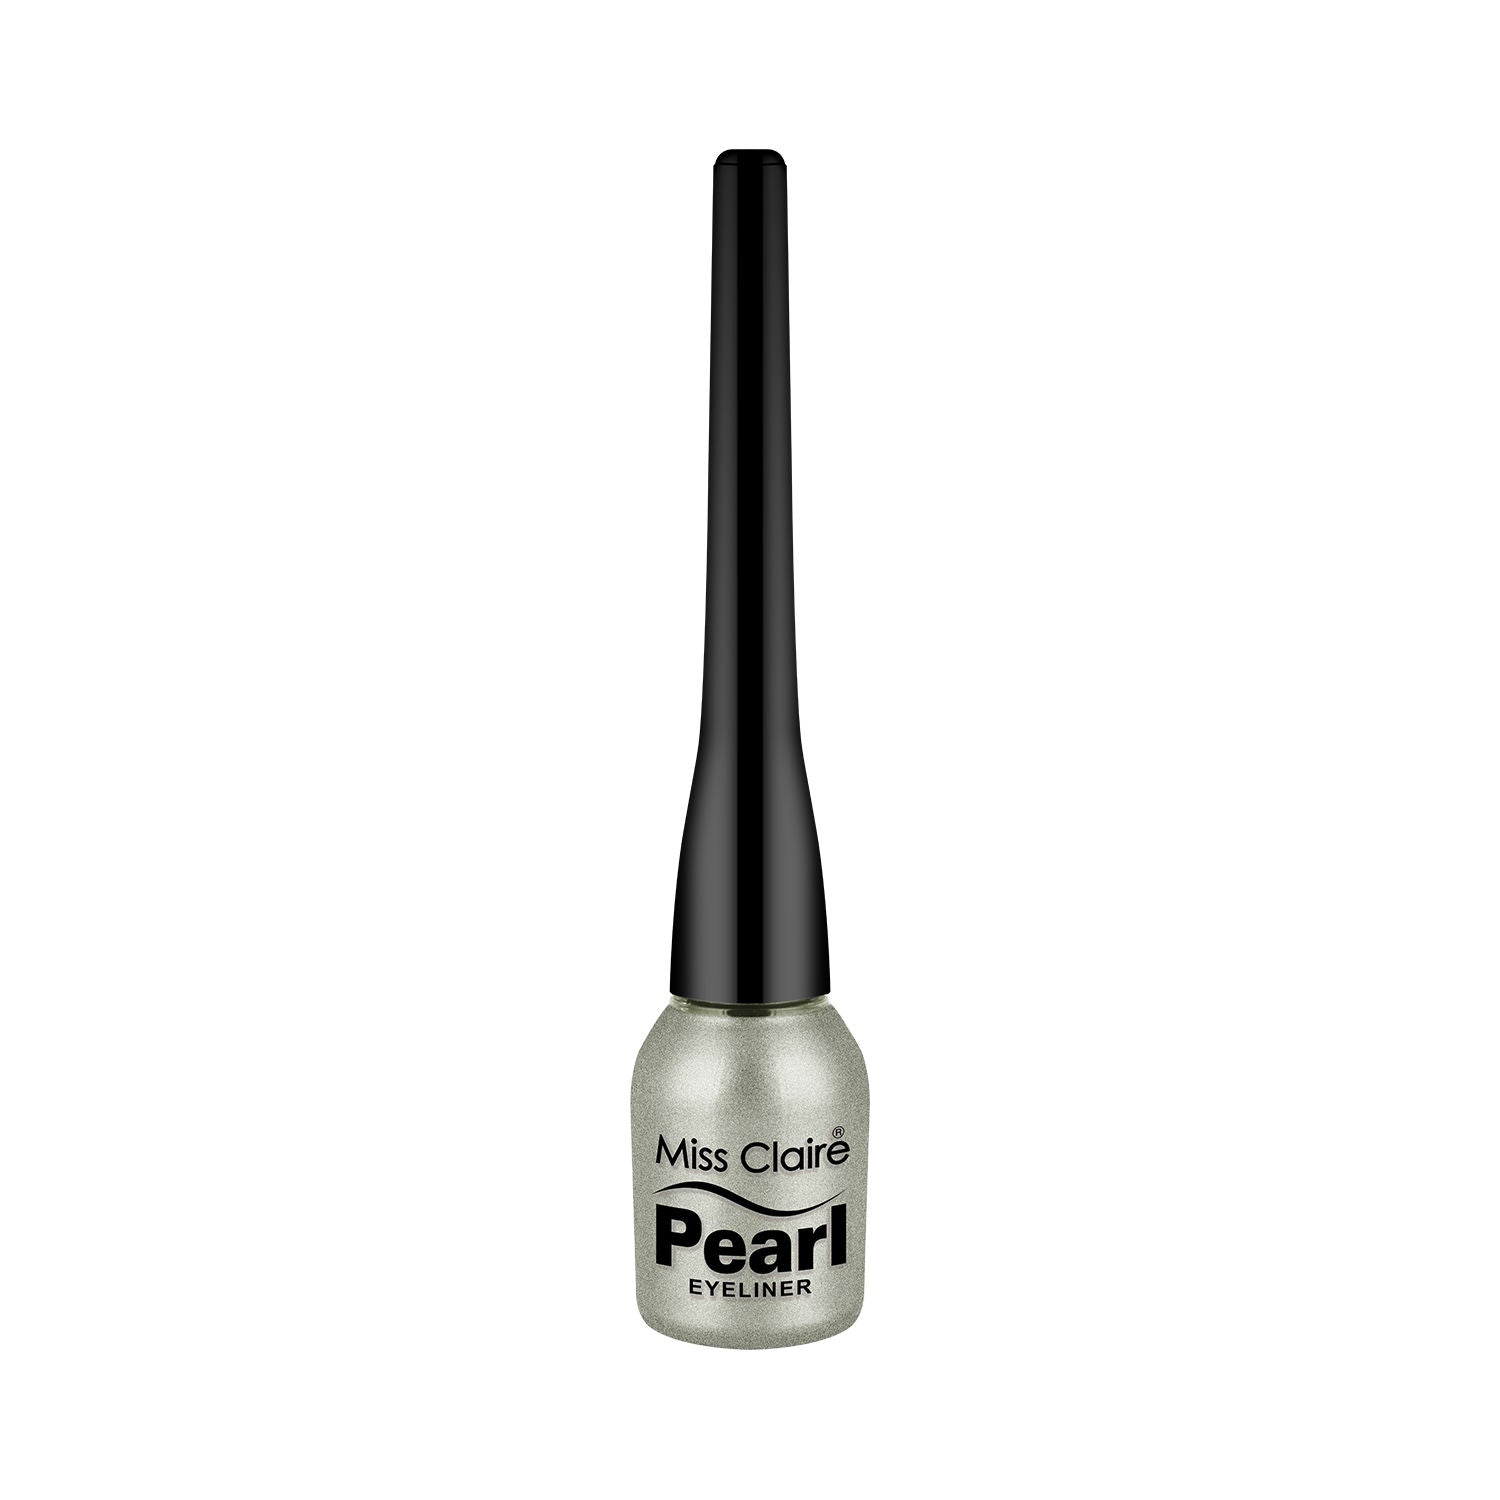 Miss Claire Pearl Eyeliner - 17 Light Gold - 5 gms